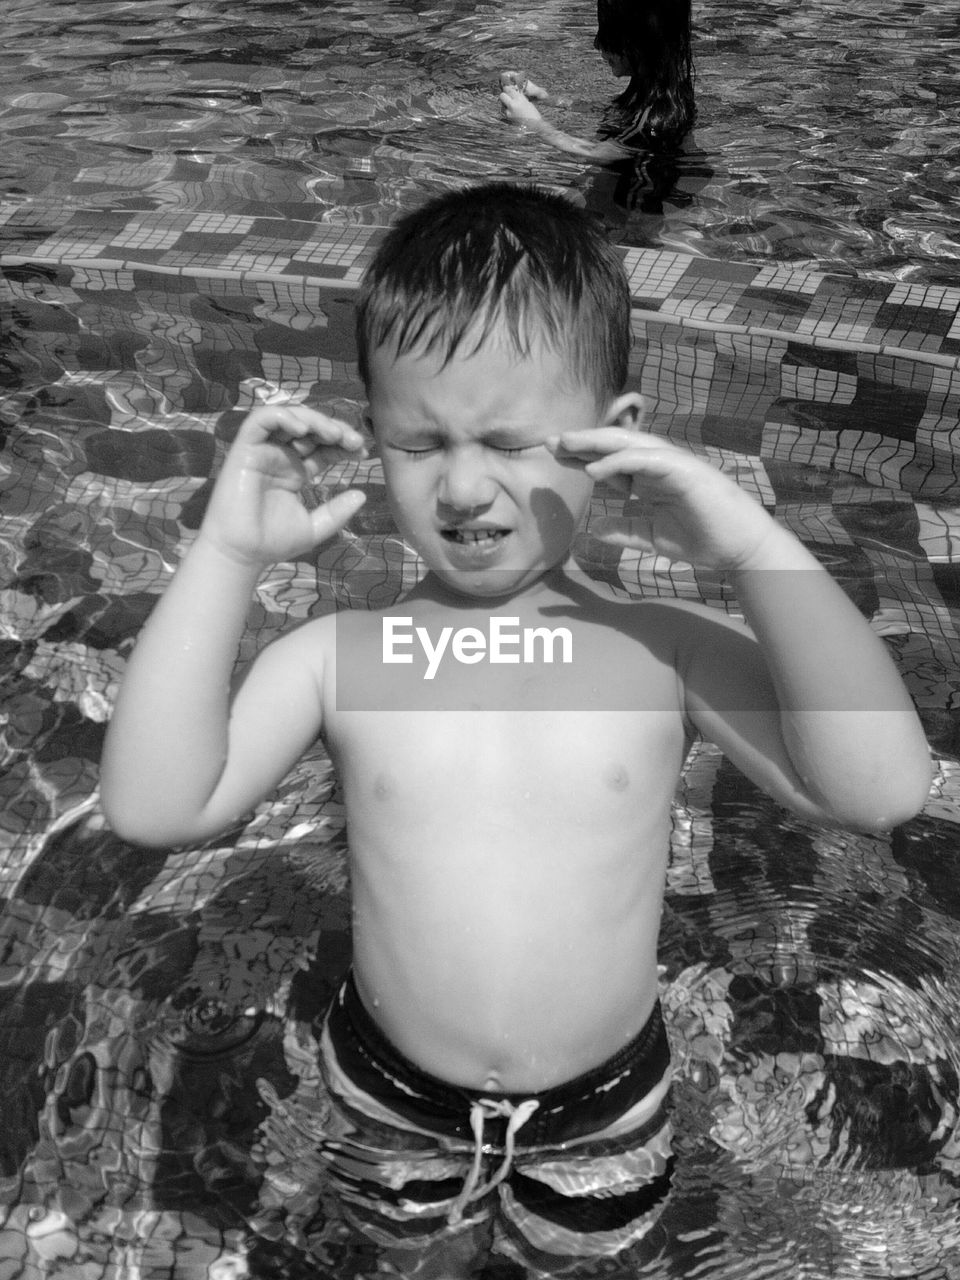 Shirtless boy with closed eyes standing in swimming pool